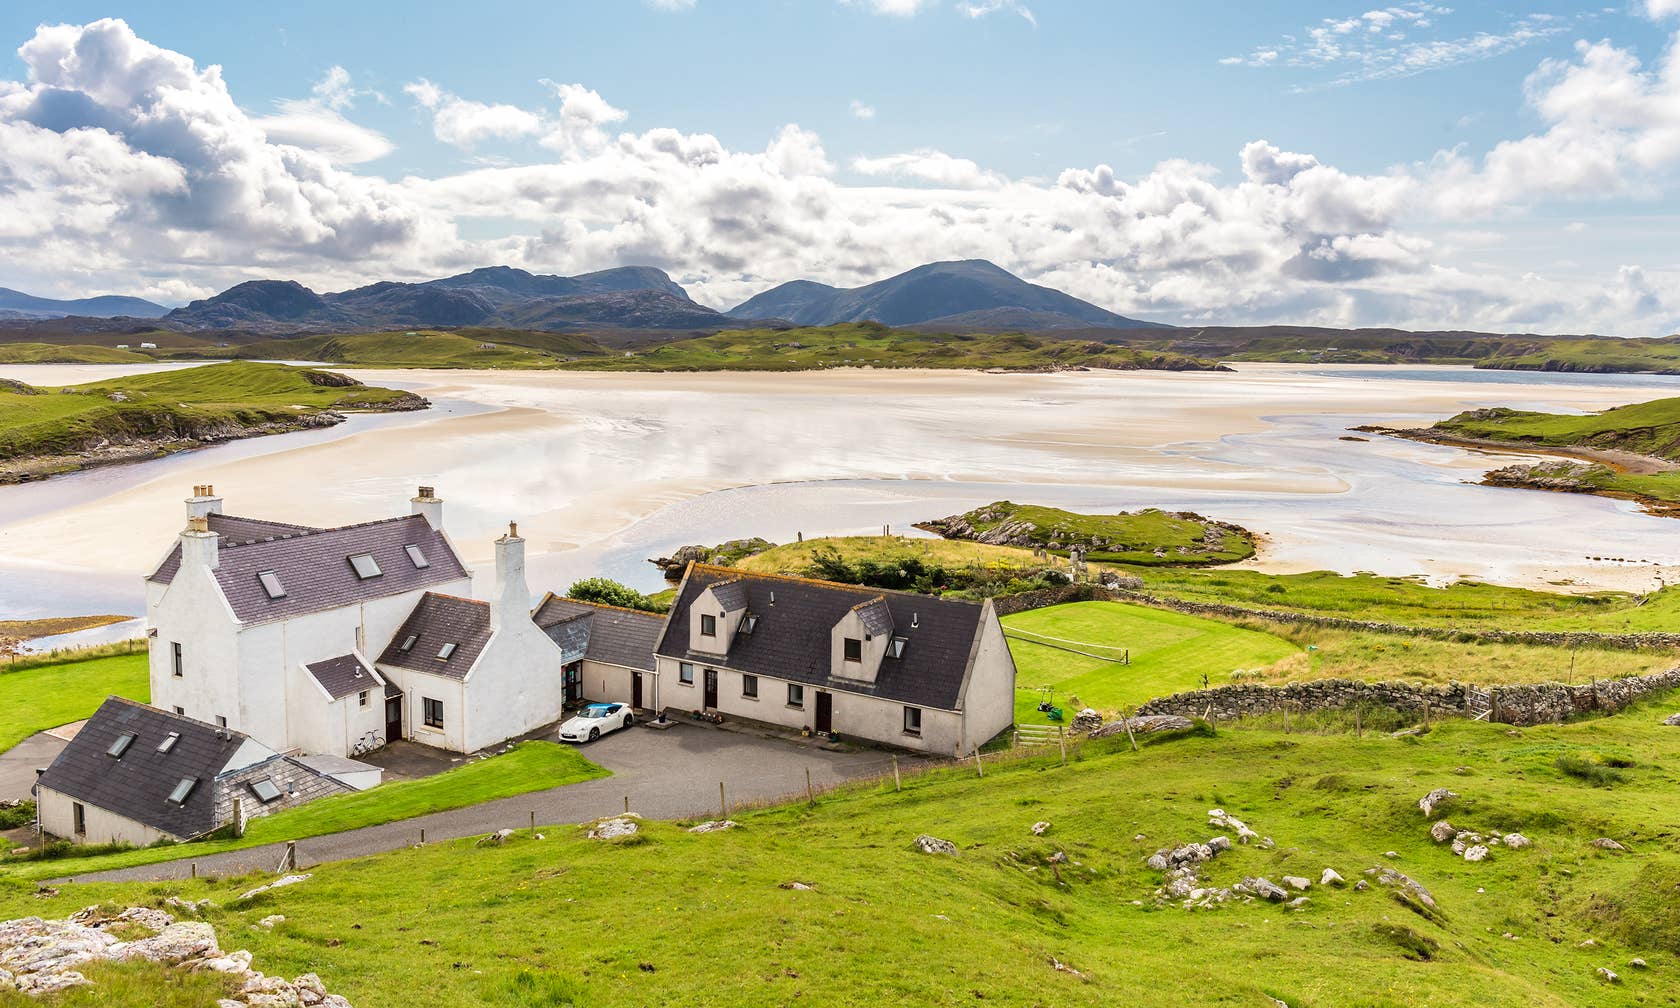 Holiday rentals in Harris